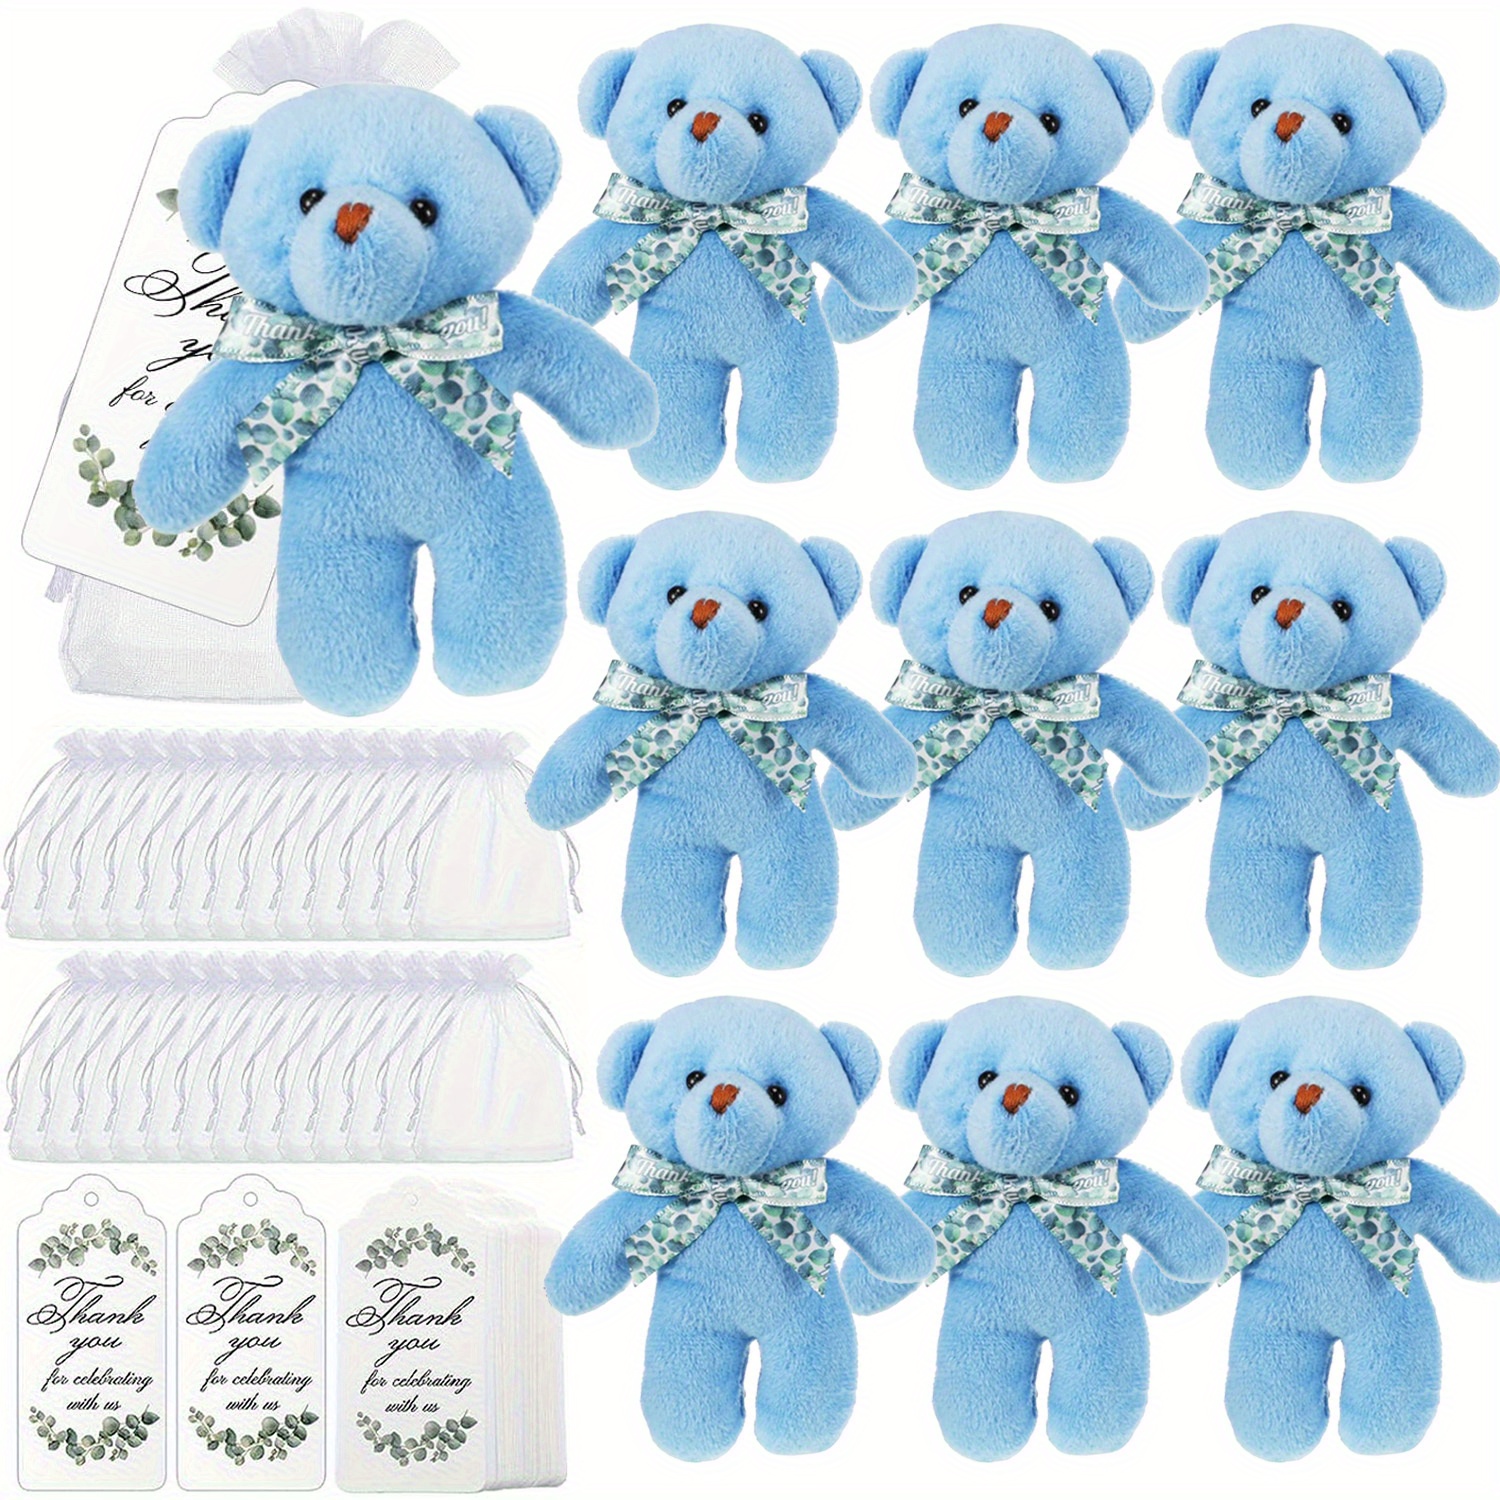 

10 Sets, Baby Shower Small Bears Tiny Plush Bear 4.72 Inch Mini Stuffed Animals Small Bear Party Favors With Thank You Tags And Mesh Bags For Diy Keychain Birthday Baby Shower